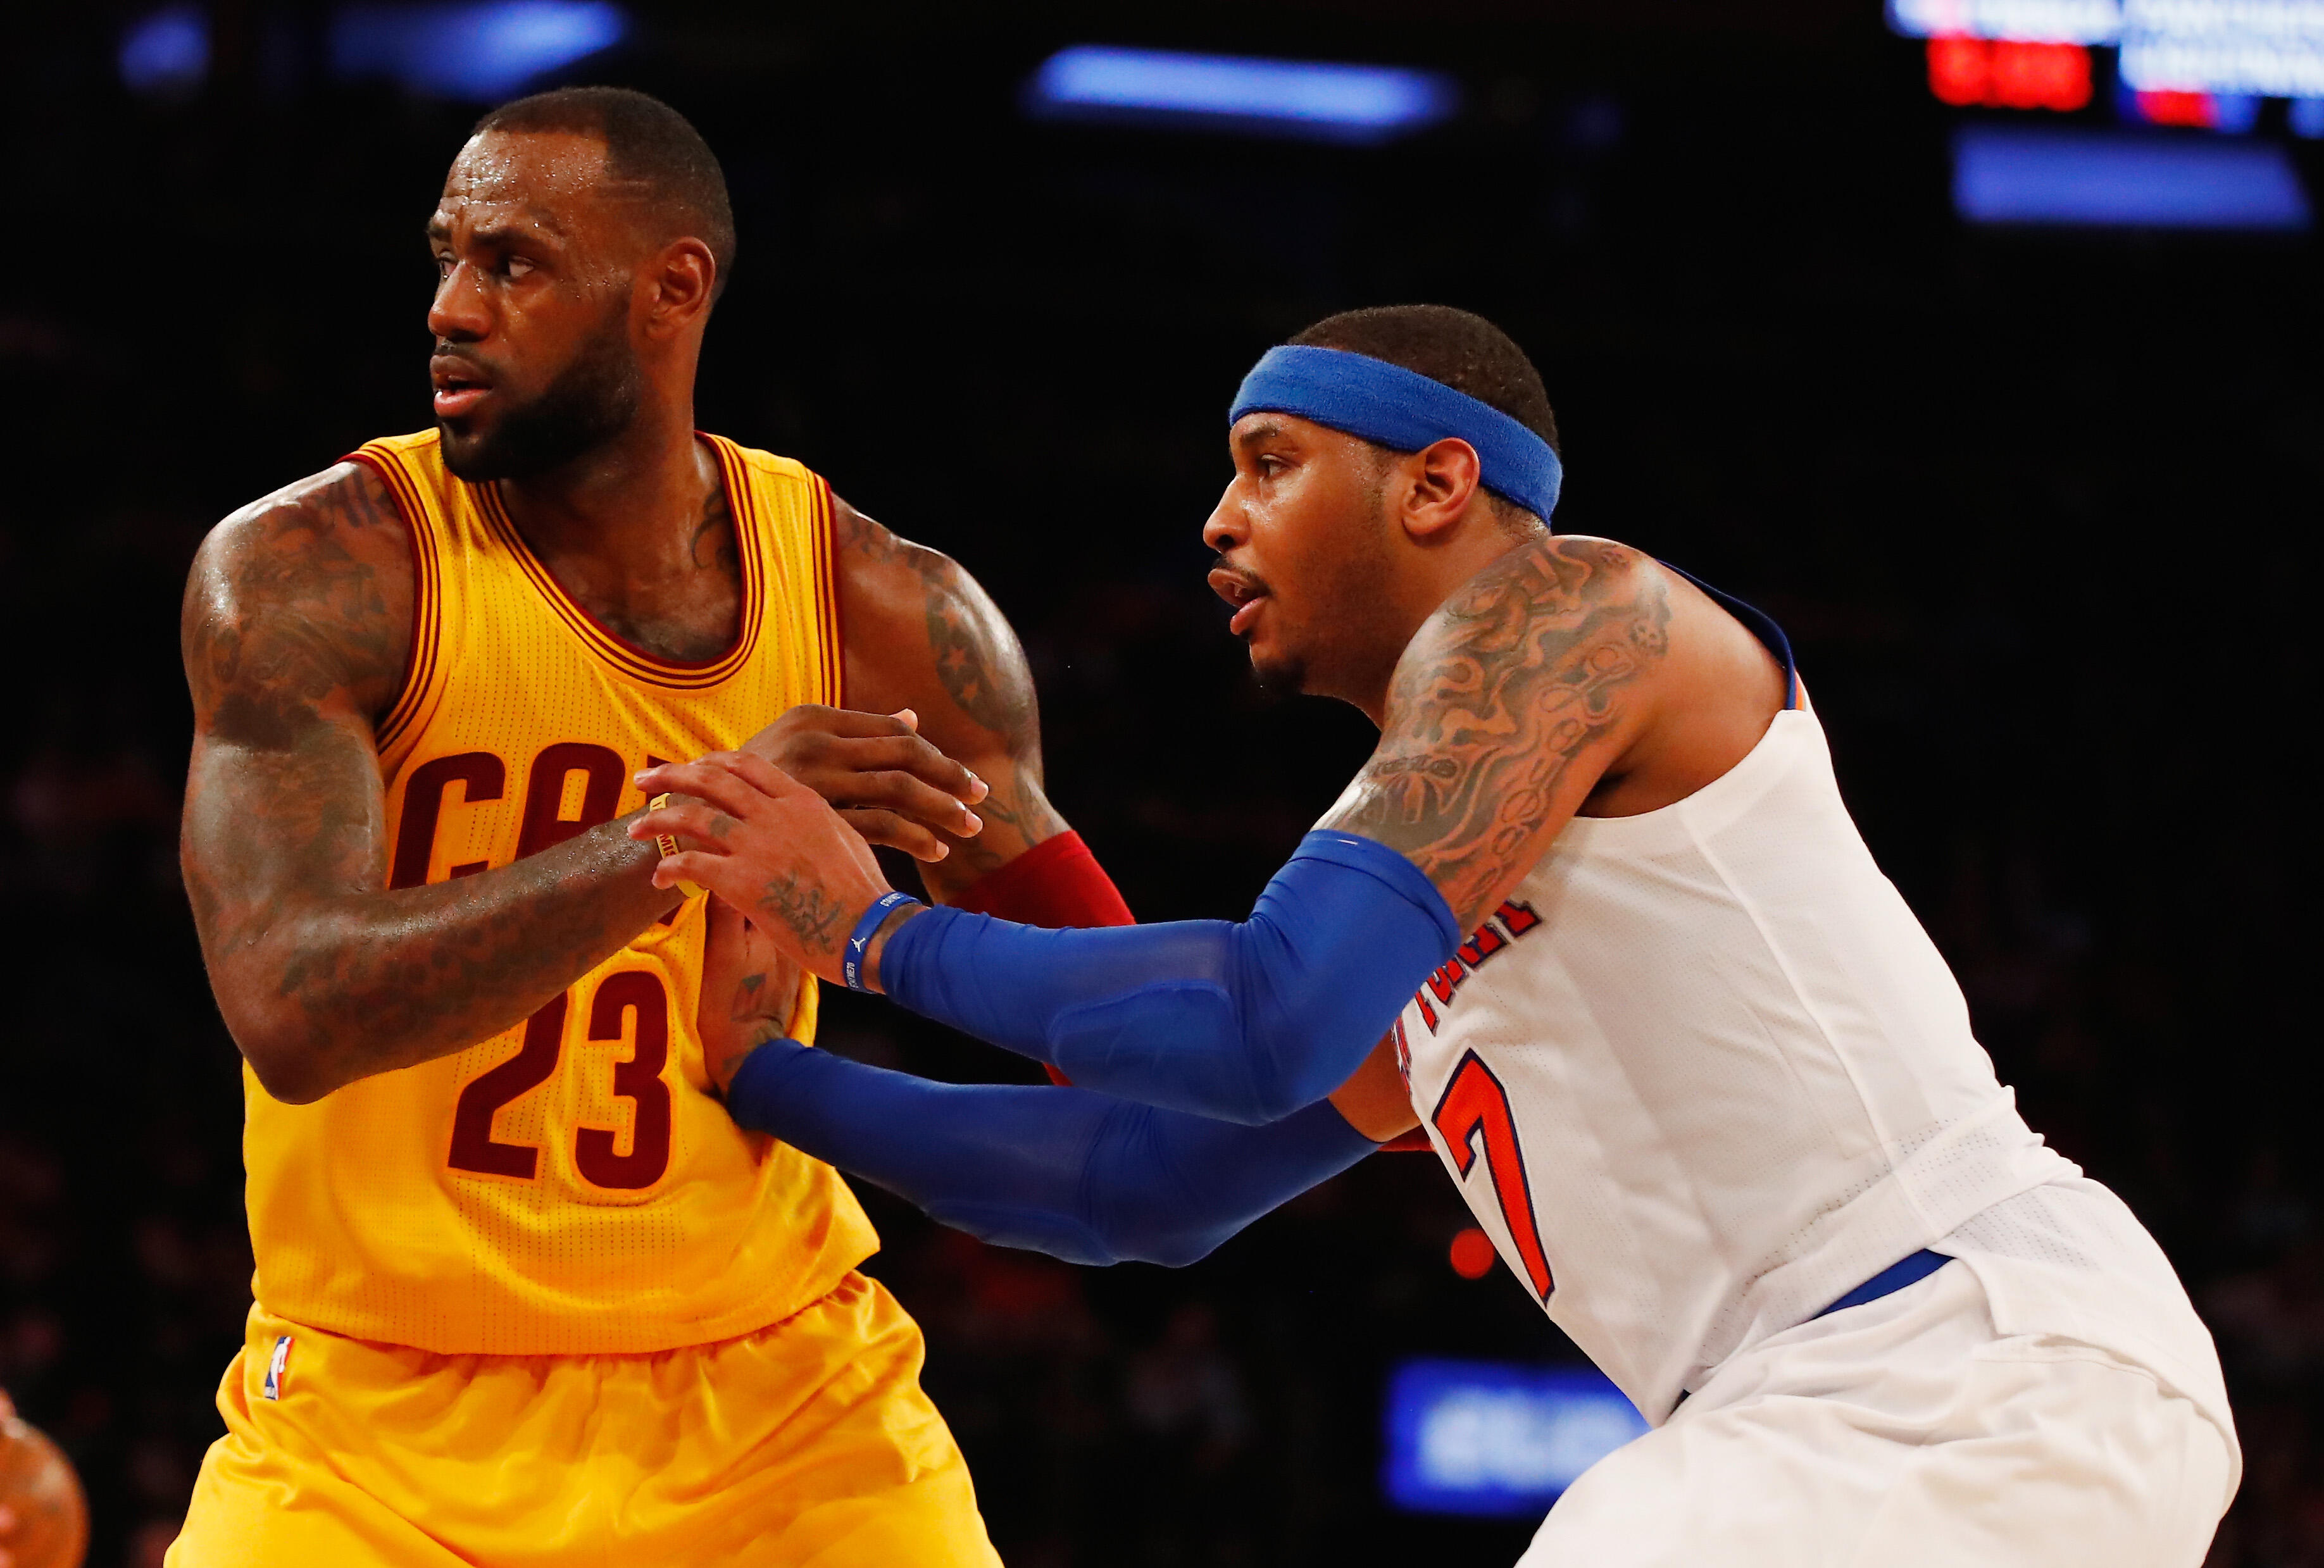 NEW YORK, NY - MARCH 26:  Carmelo Anthony #7 of the New York Knicks and LeBron James #23 of the Cleveland Cavaliers battle for position during their game at Madison Square Garden on March 26, 2016 in New York City.  NOTE TO USER: User expressly acknowledg